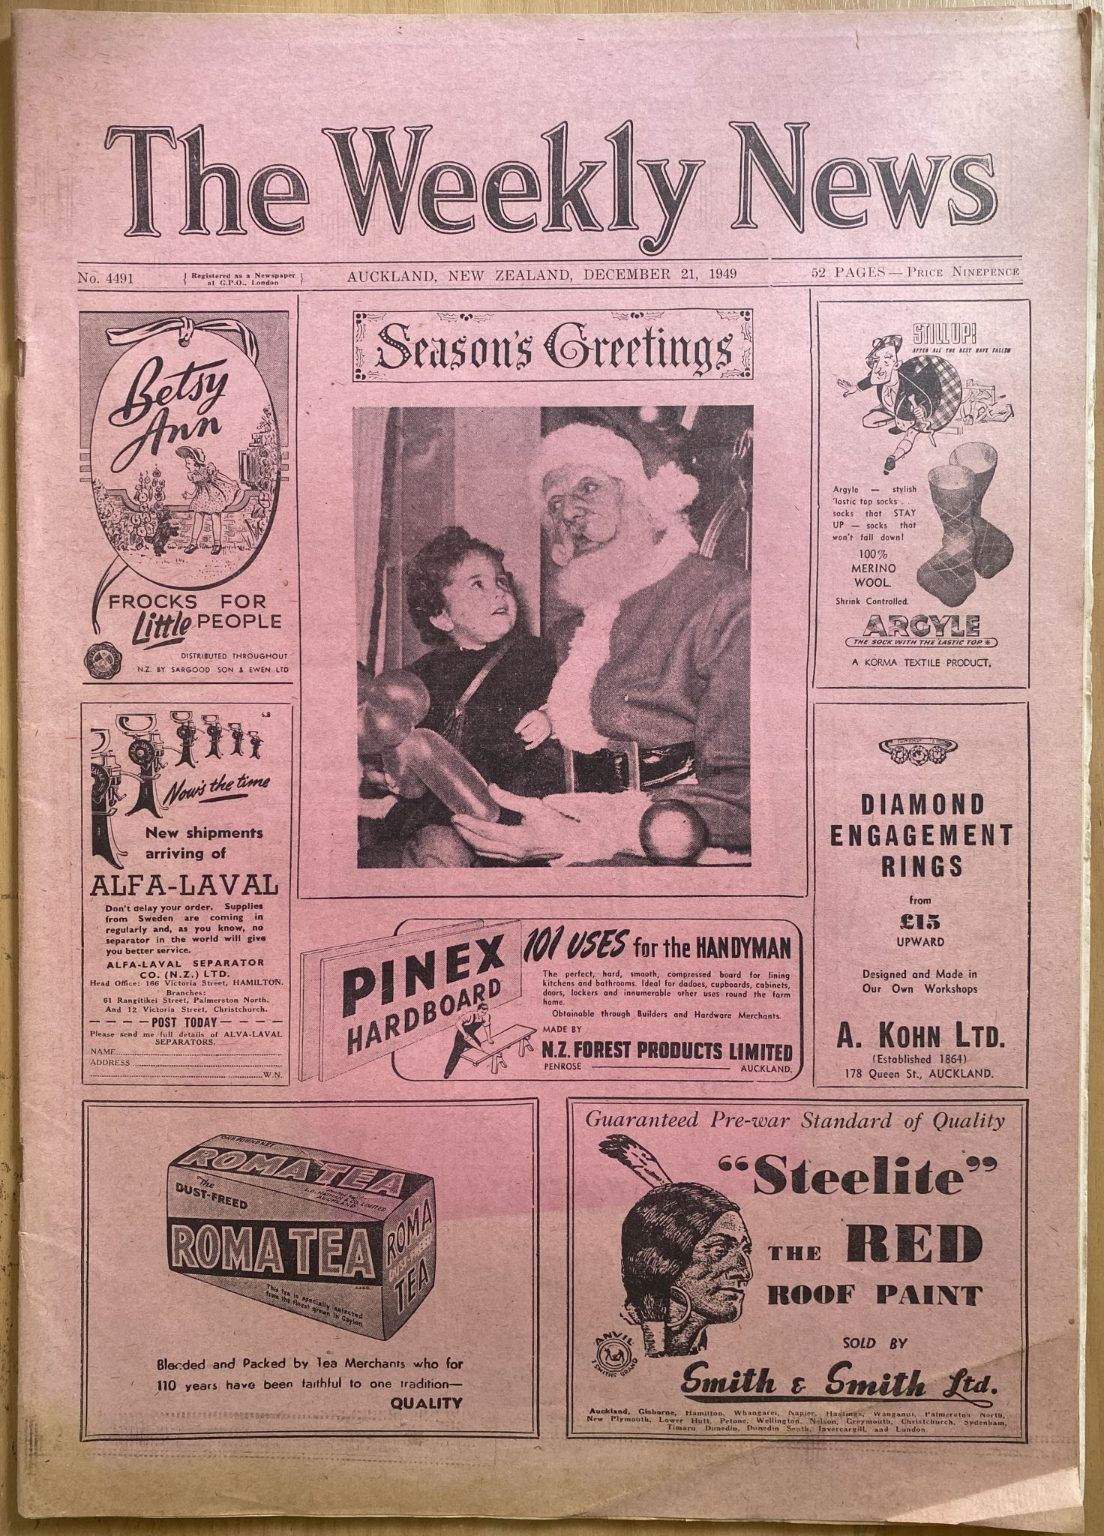 OLD NEWSPAPER: The Weekly News - No. 4491, 21 December 1949